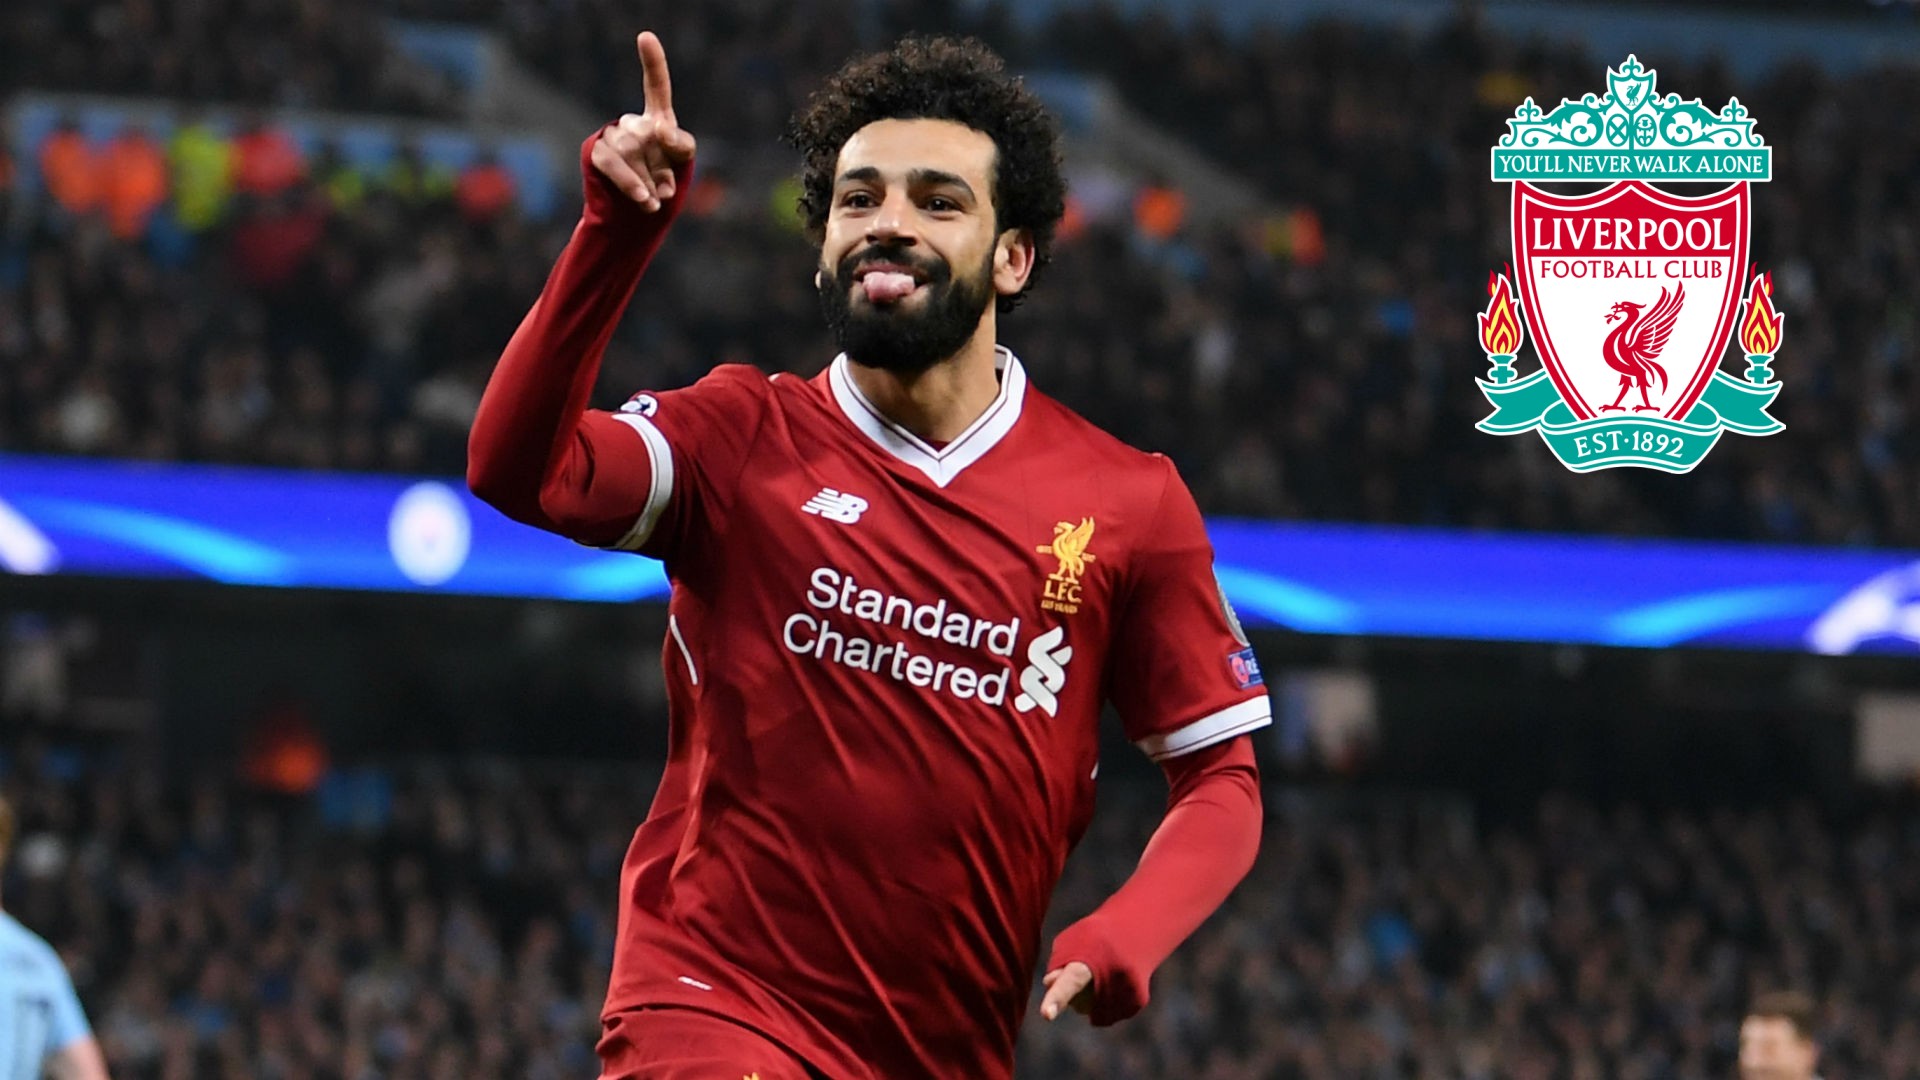 Liverpool Mohamed Salah Background Wallpaper HD with image resolution 1920x1080 pixel. You can make this wallpaper for your Desktop Computer Backgrounds, Mac Wallpapers, Android Lock screen or iPhone Screensavers